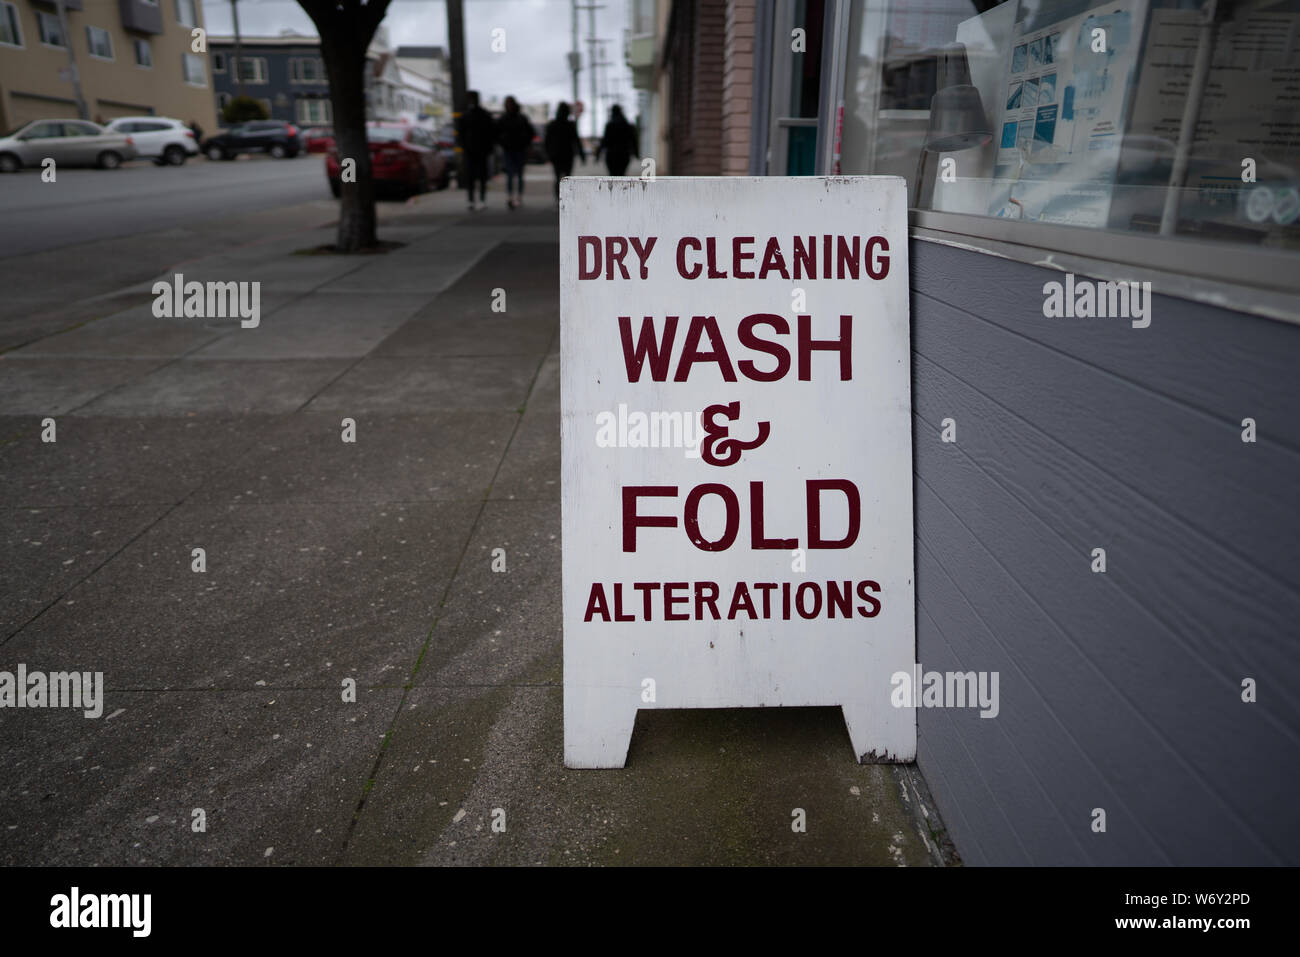 Dry cleaning wash and fold alterations signboard outside of store on sidewalk Stock Photo